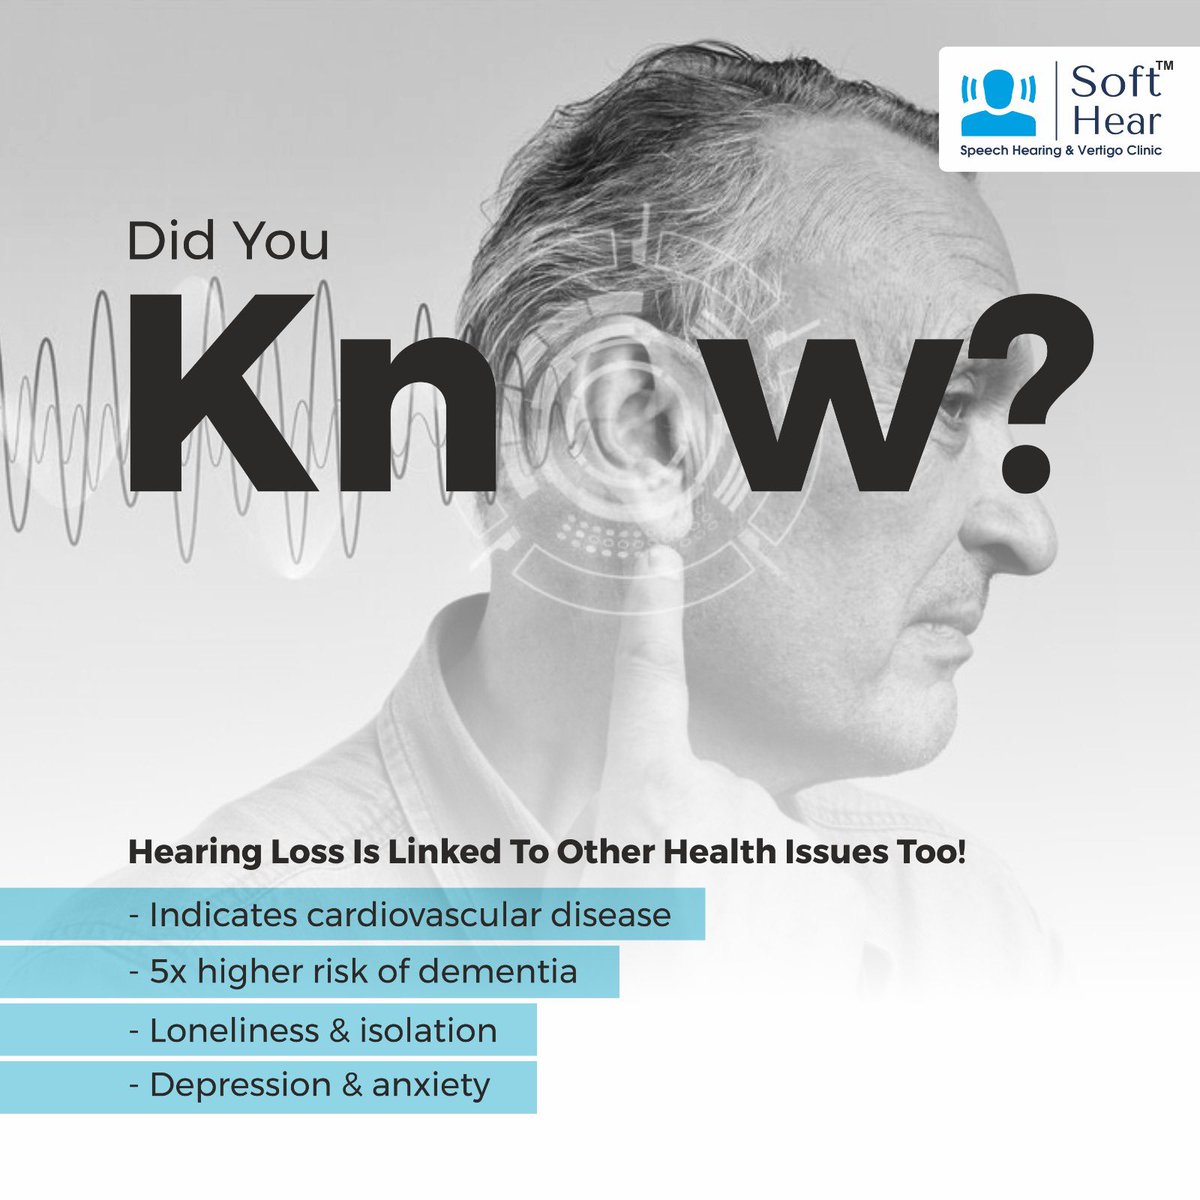 Adressing hearing health issues reduces the risk of several other health issues! So act quick, and book your FREE hearing test with us! Visit Soft Hear for an enhanced hearing experience.
.
.
.
.
#softhear #audiology #hearingaid #HearingCare #hearingloss #hearingsolutions